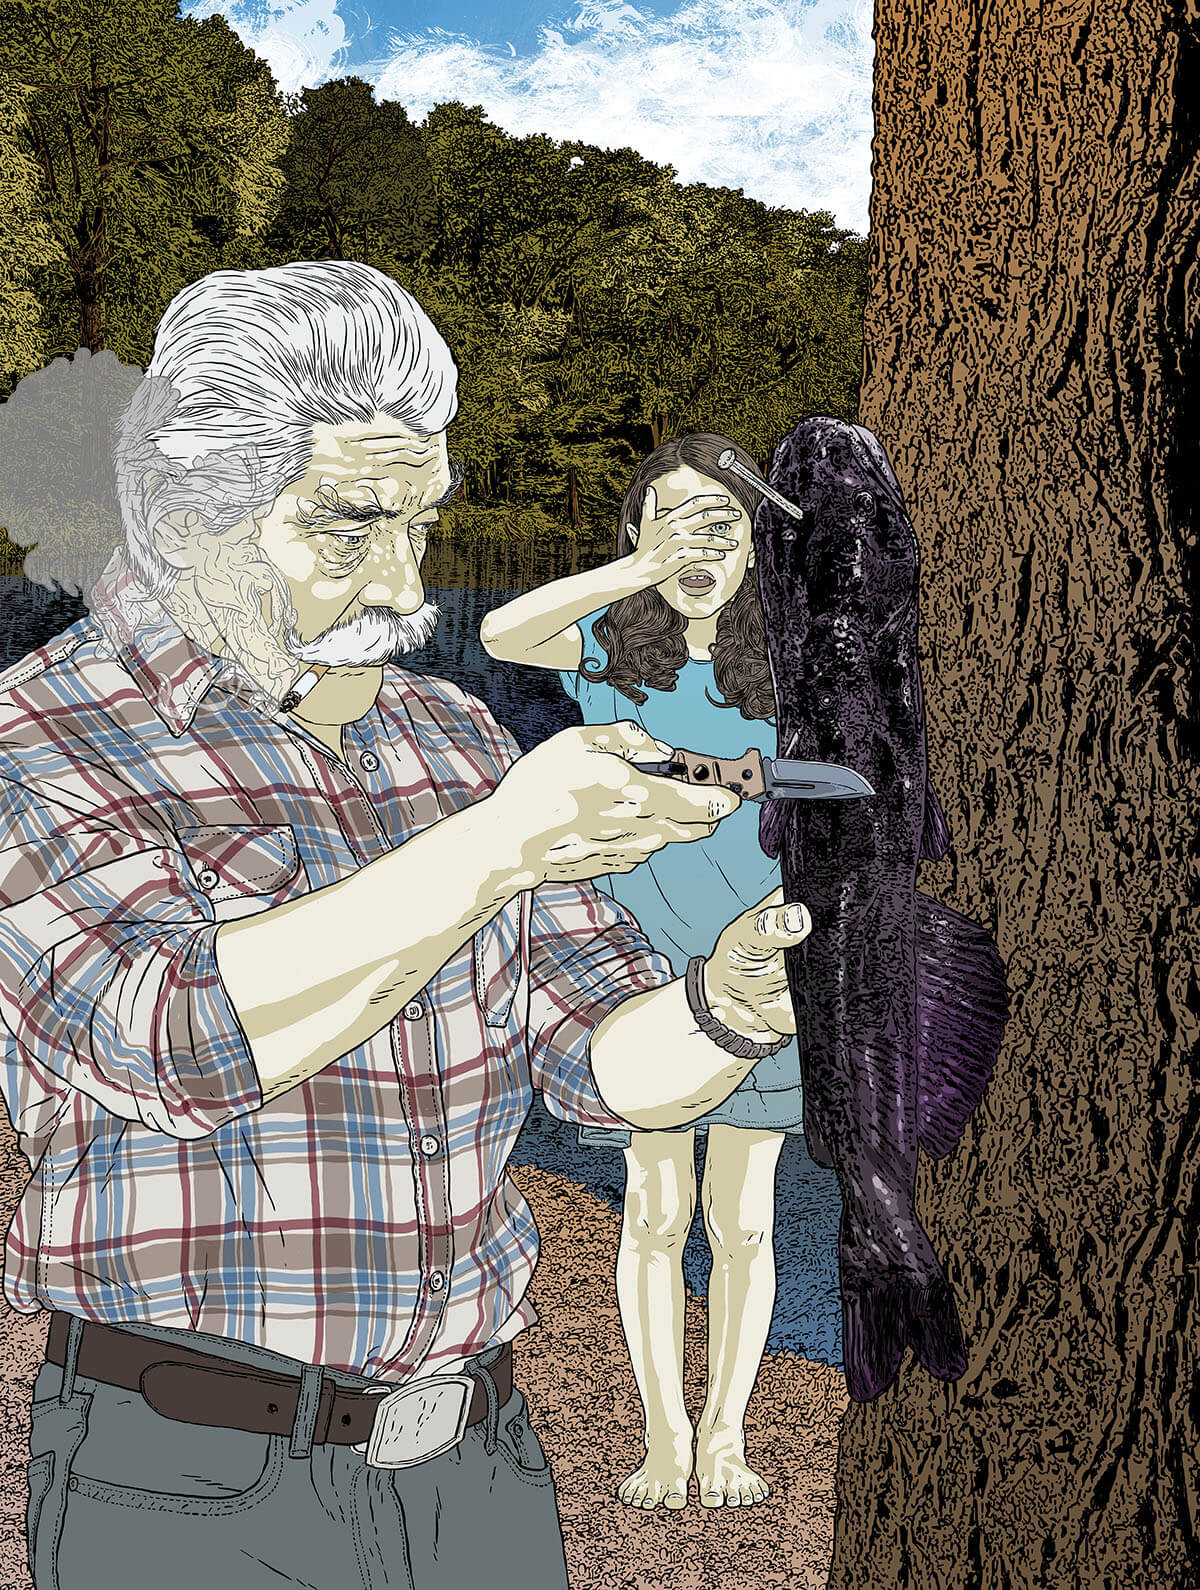 An illustration of a young woman covering her eyes as an older man carves into a brown tree with a small knife